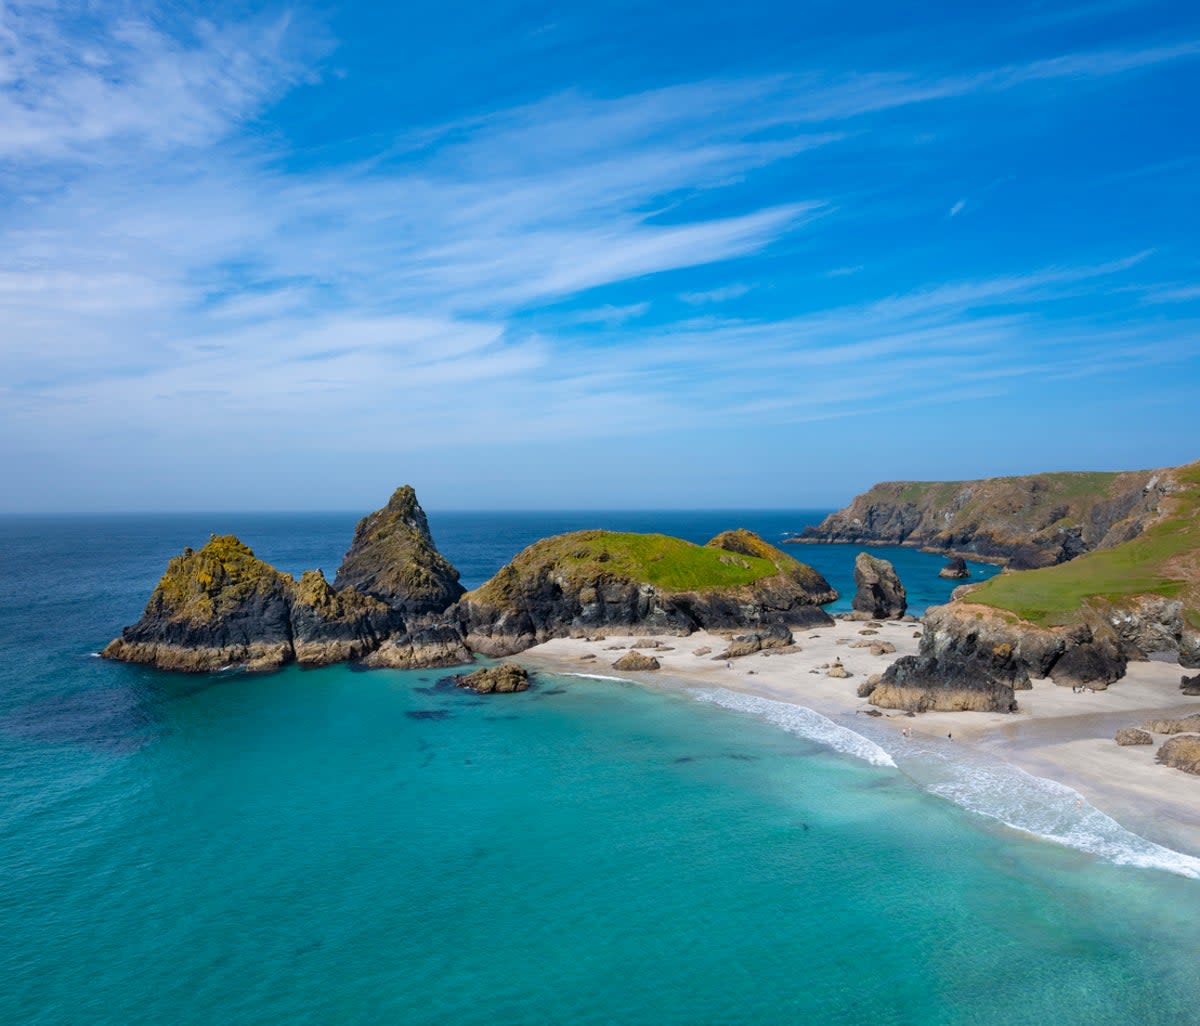 Kynance Cove, a popular place to end long walks  (Getty Images/iStockphoto)